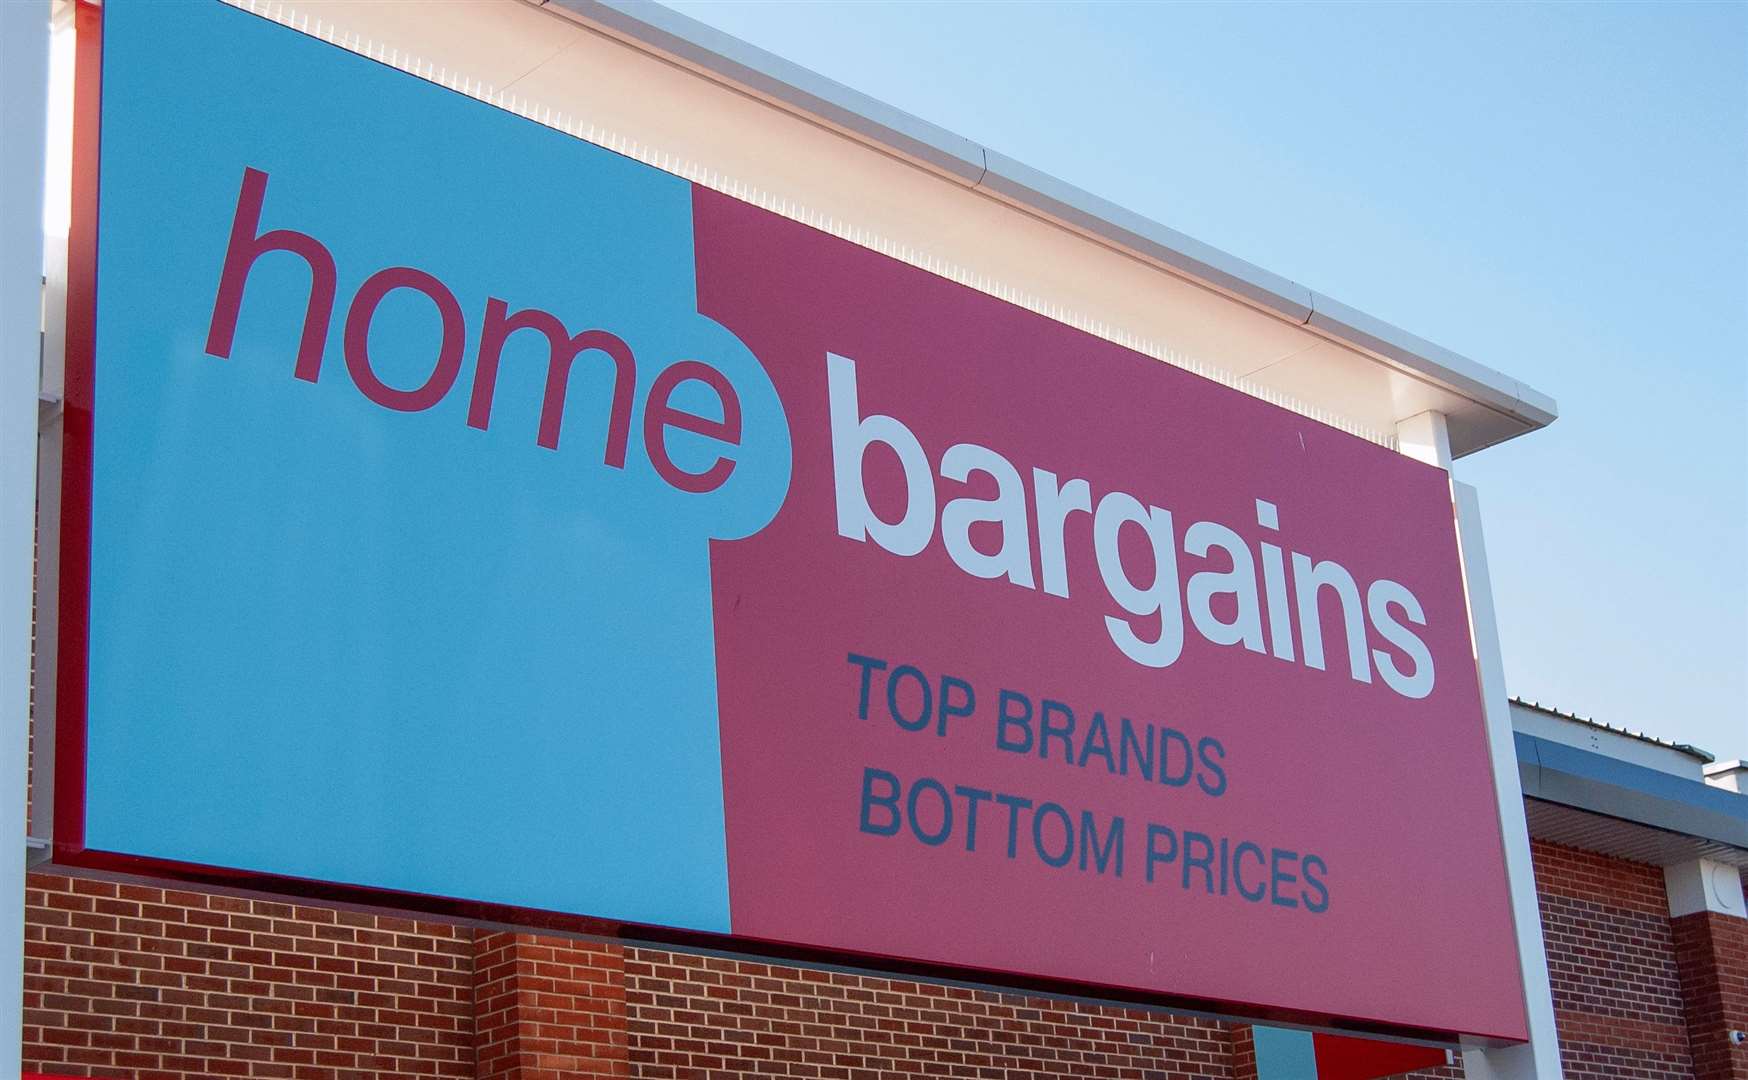 Plans for the development of a new Home Bargains store in the Stratton area of Inverness have been submitted to The Highland Council.